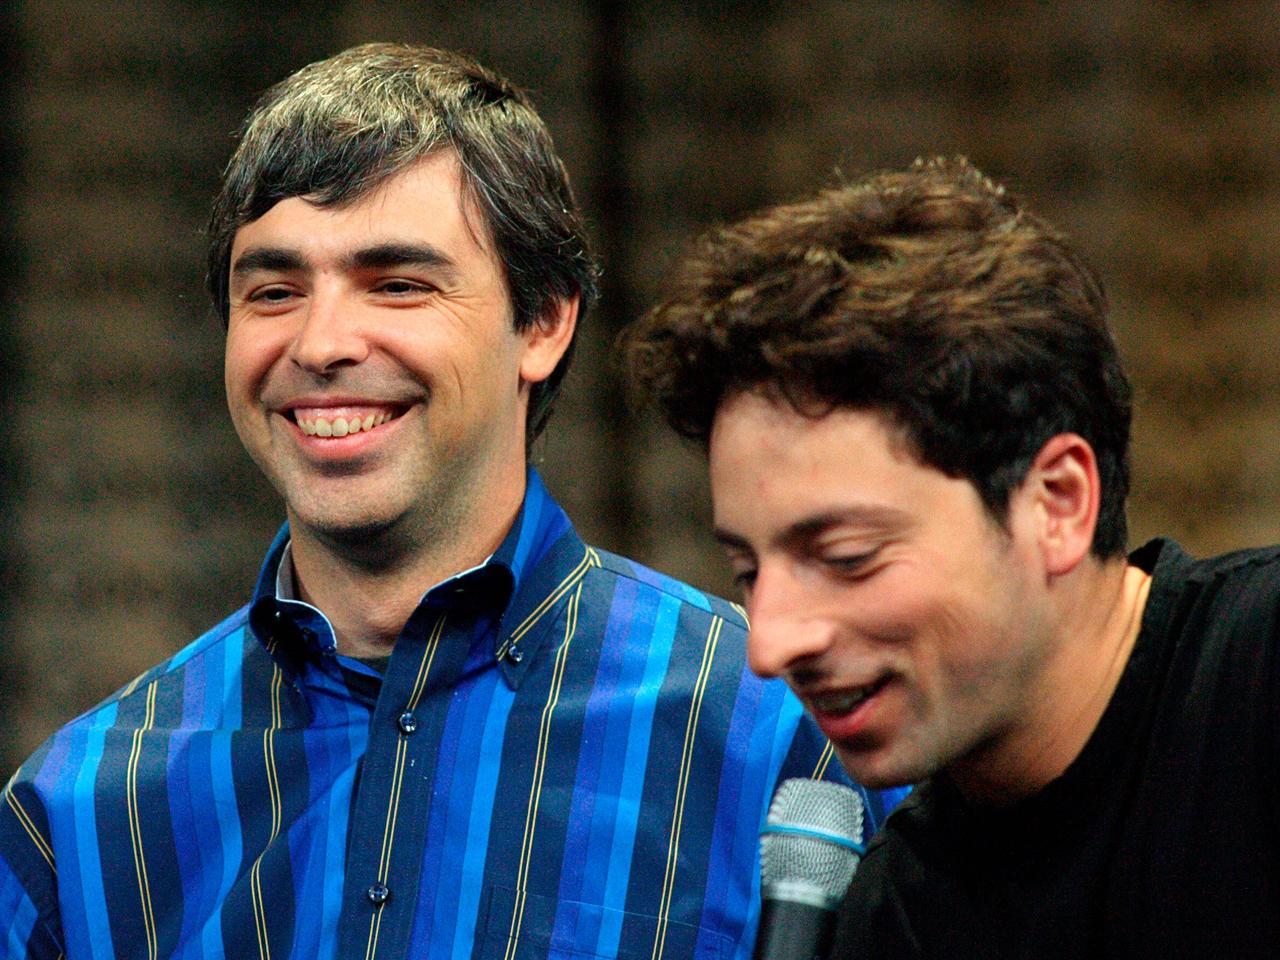 Larry Page (left) and Sergey Brin